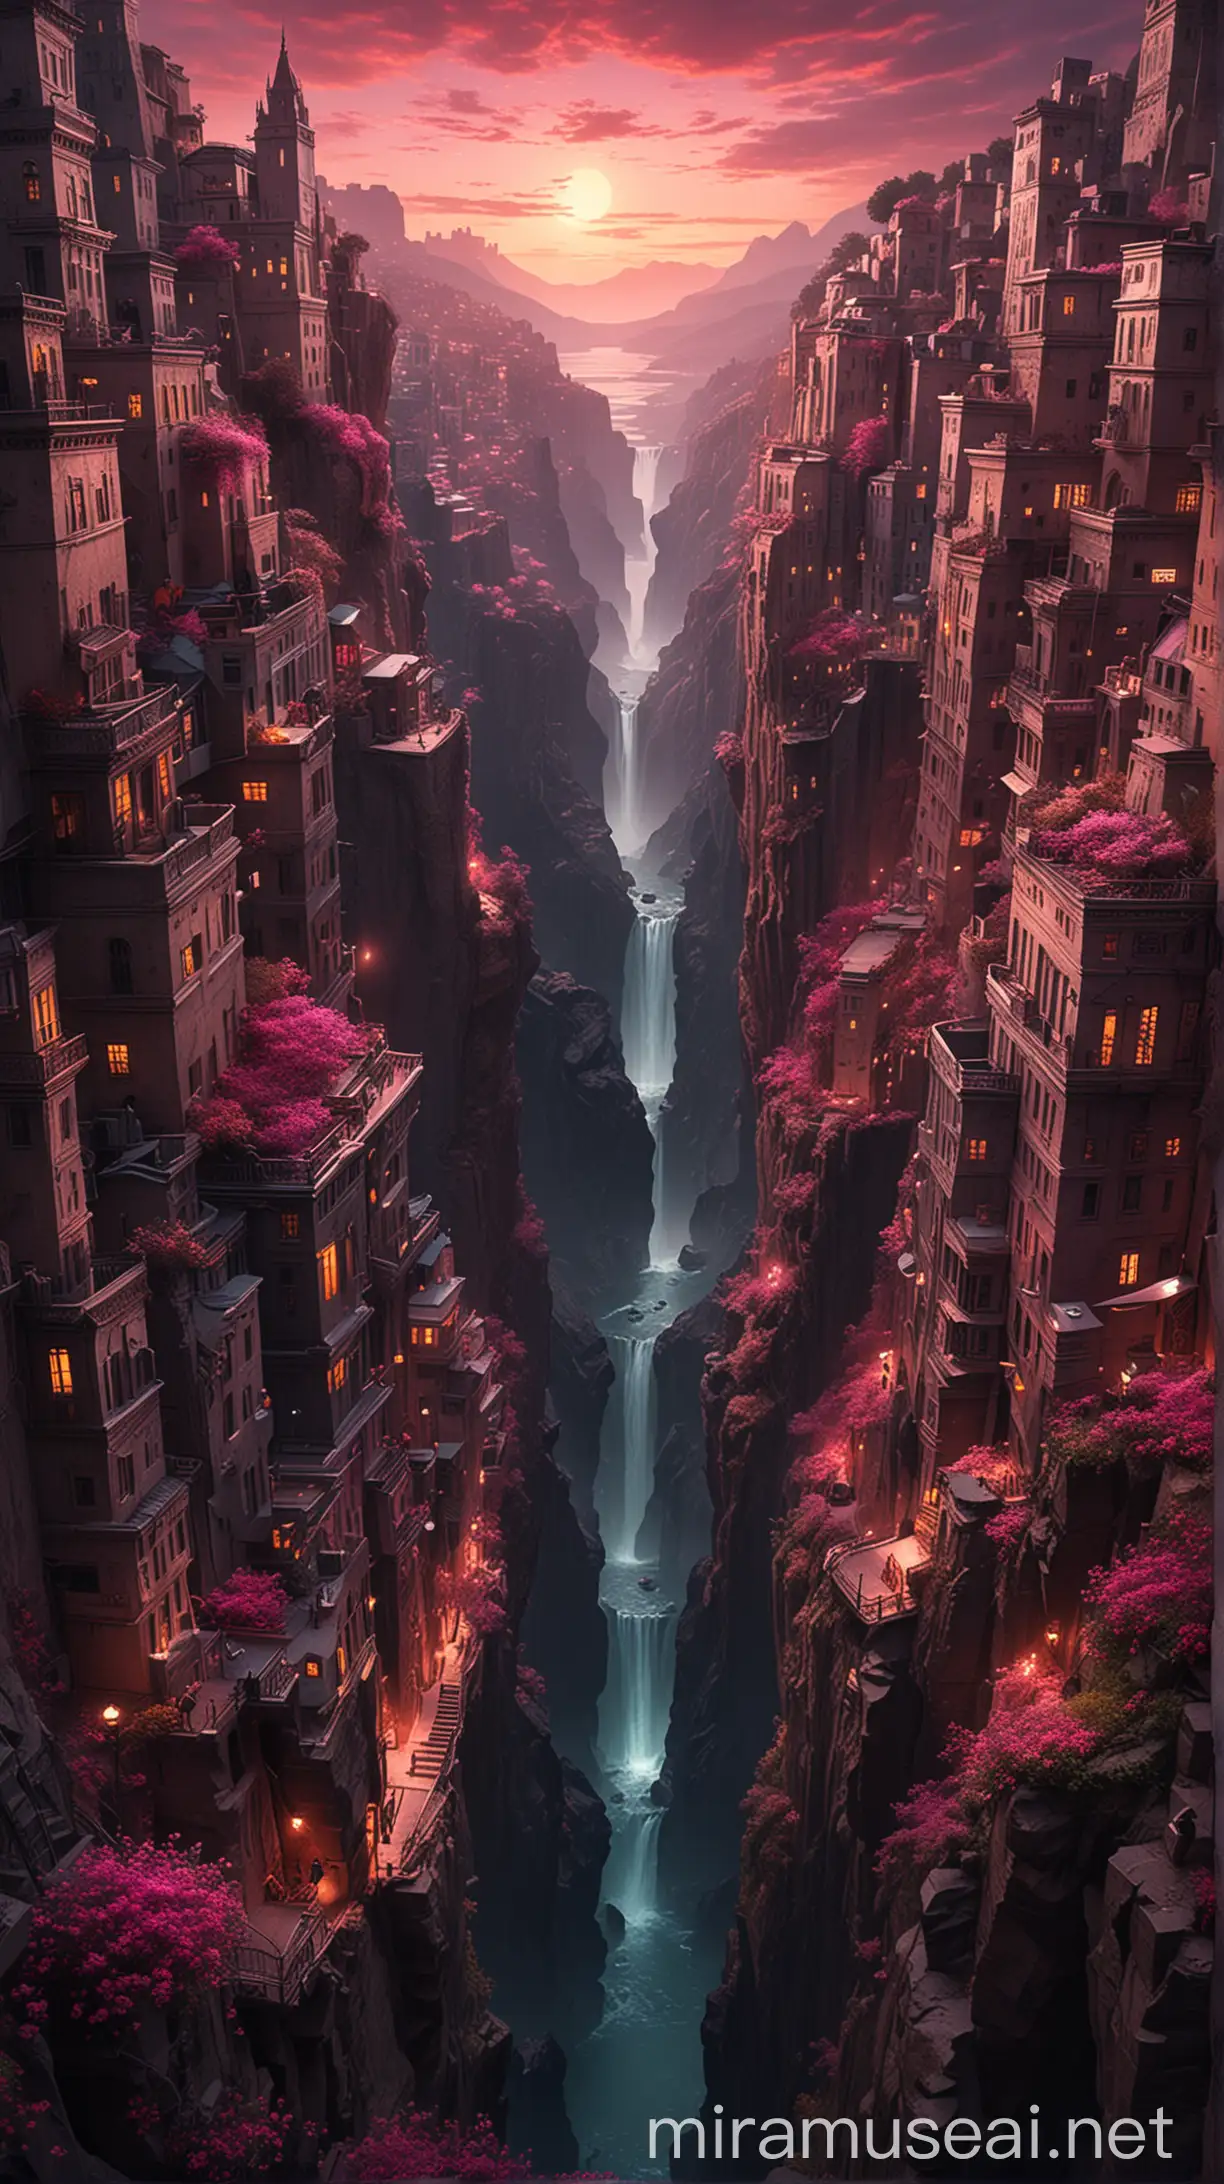 In the ethereal glow of a magenta-tinted world, a lone figure stands atop a precipice, transfixed by the breathtaking sight before him. Below, nestled within the cradle of the cliff's embrace, lies a city unlike any other-a metropolis born of dreams, a testament to the boundless creativity of the human spirit. As the radiant sun casts its warm embrace over the scene, every corner of this surreal cityscape is illuminated with a heavenly glow, painting the landscape in hues of rose and gold. Skyscrapers stretch skyward like towering monoliths, their angular silhouettes cutting a striking contrast against the horizon. Yet, there's an otherworldly quality to this city, an aura of the fantastical that defies logic and reason. Streets twist and turn in mesmerizing patterns, leading the eye on a journey of discovery through alleyways adorned with shimmering lights and cascading waterfalls.For the man on the cliff's edge, this sight is nothing short of miraculous-a city that was never meant to be, yet exists in all its splendor before his eyes. In this moment, he feels a swell of emotion rising within him-an overwhelming sense of wonder, gratitude, and perhaps even a hint of melancholy for the beauty of a world that exists only in dreams.